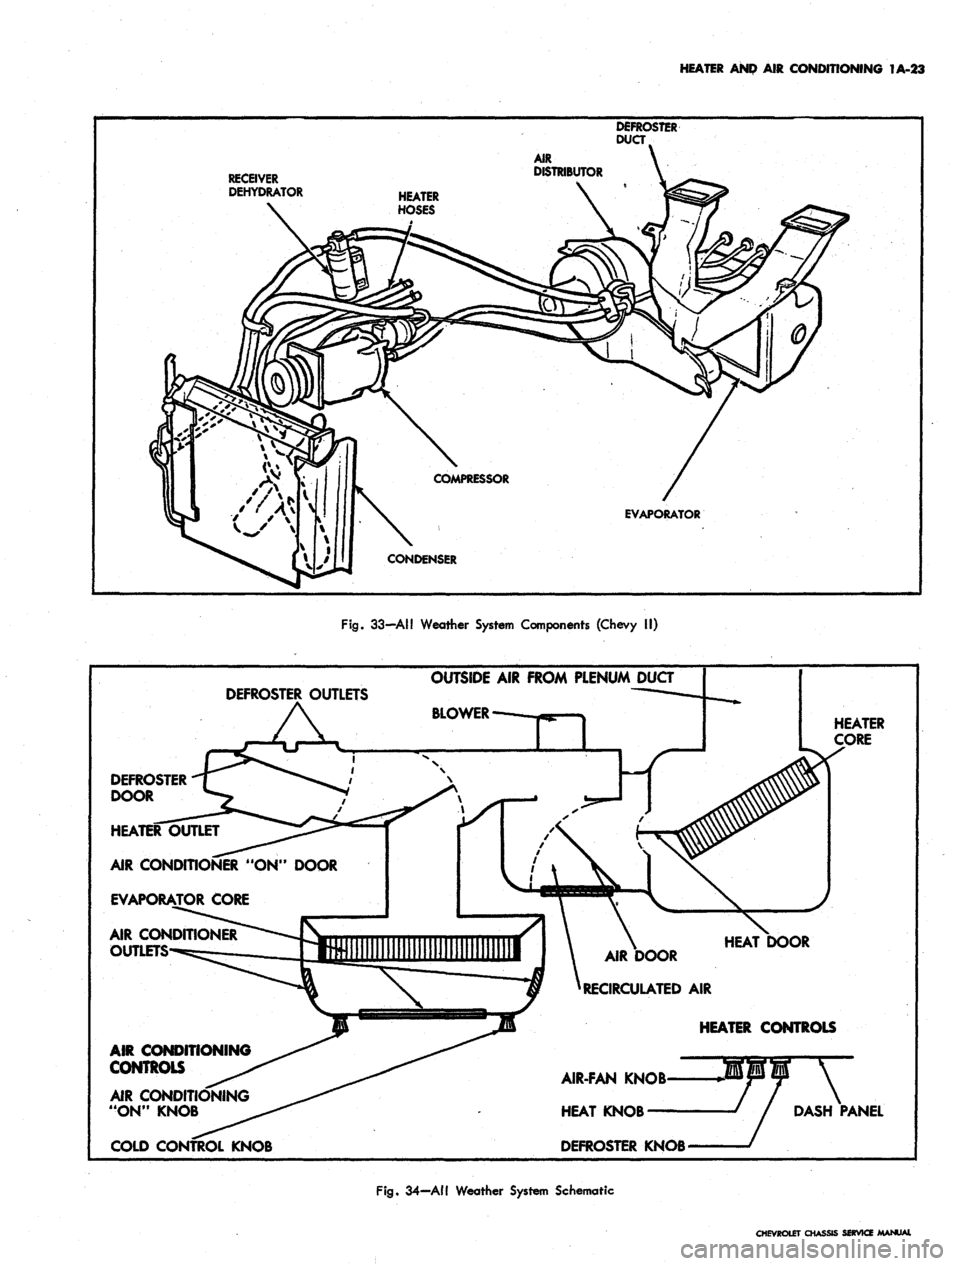 CHEVROLET CAMARO 1967 1.G Chassis Service Manual 
HEATER AND AIR CONDITIONING 1A-23

DEFROSTER

RECEIVER

DEHYDRATOR

EVAPORATOR

Fig.
 33—All Weather System Components (Chevy II)

DEFROSTER OUTLETS 
OUTSIDE
 AIR
 FROM PLENUM DUCT

BLOWER
 --—-.